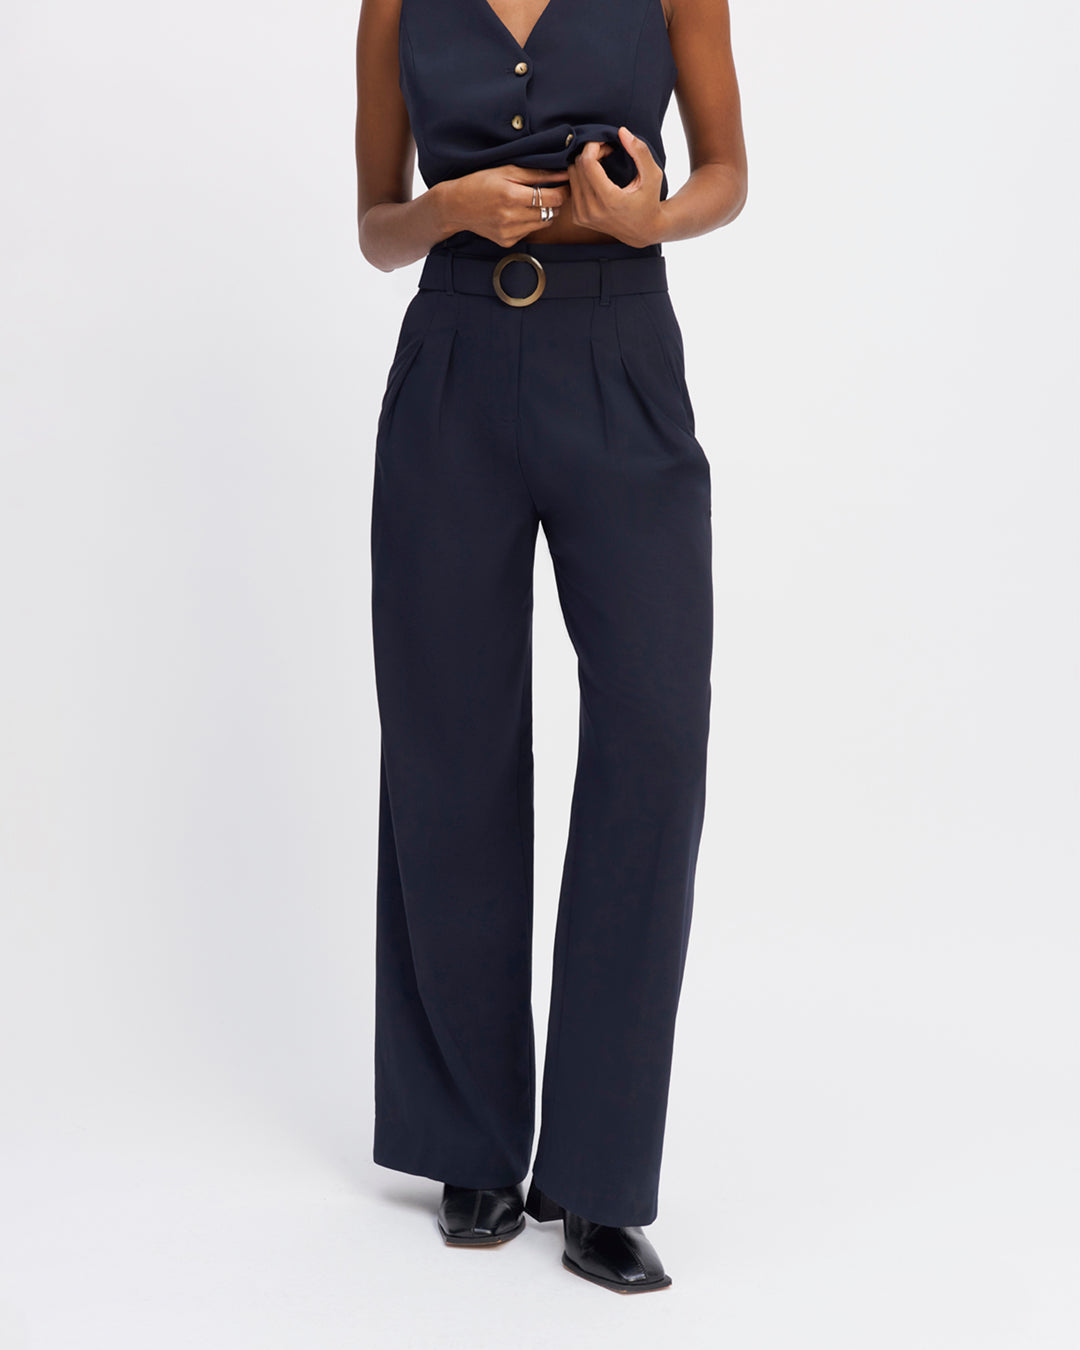 Tailor-pants-navy-blue-Palazzo-cut-High-waist-Details-double-pleated-at-the-waist-Low-leg-XXL-Dessines-the-waist-and-the-legs-Buckle-belt-Removable-buckle-belt-brown-17H10-tailors-for-women-paris-